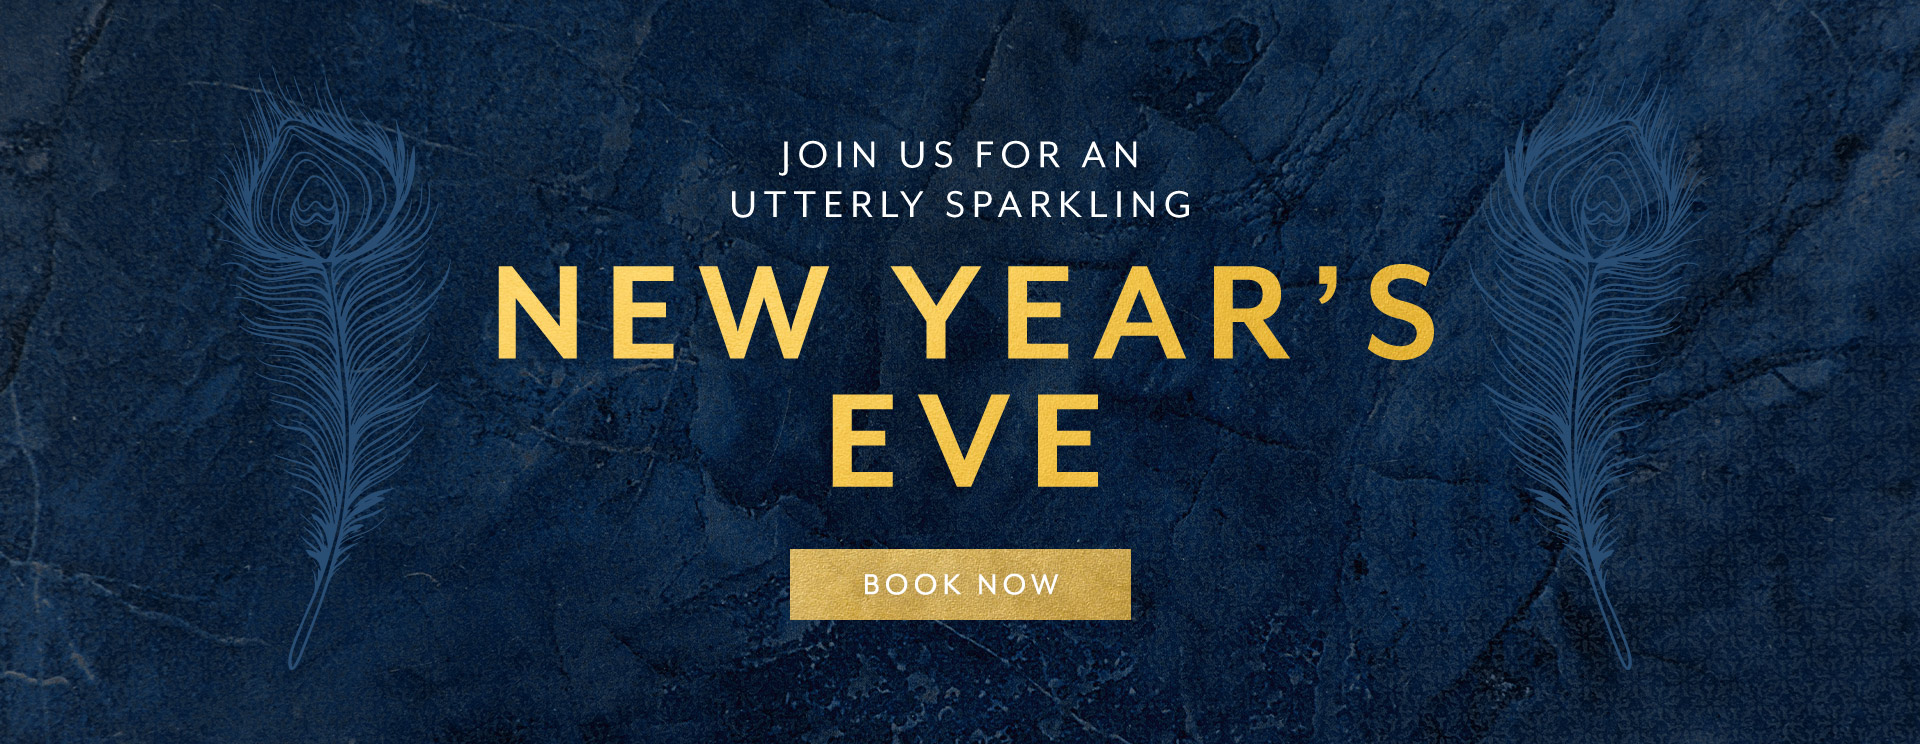 New Year's Eve at The Arkley